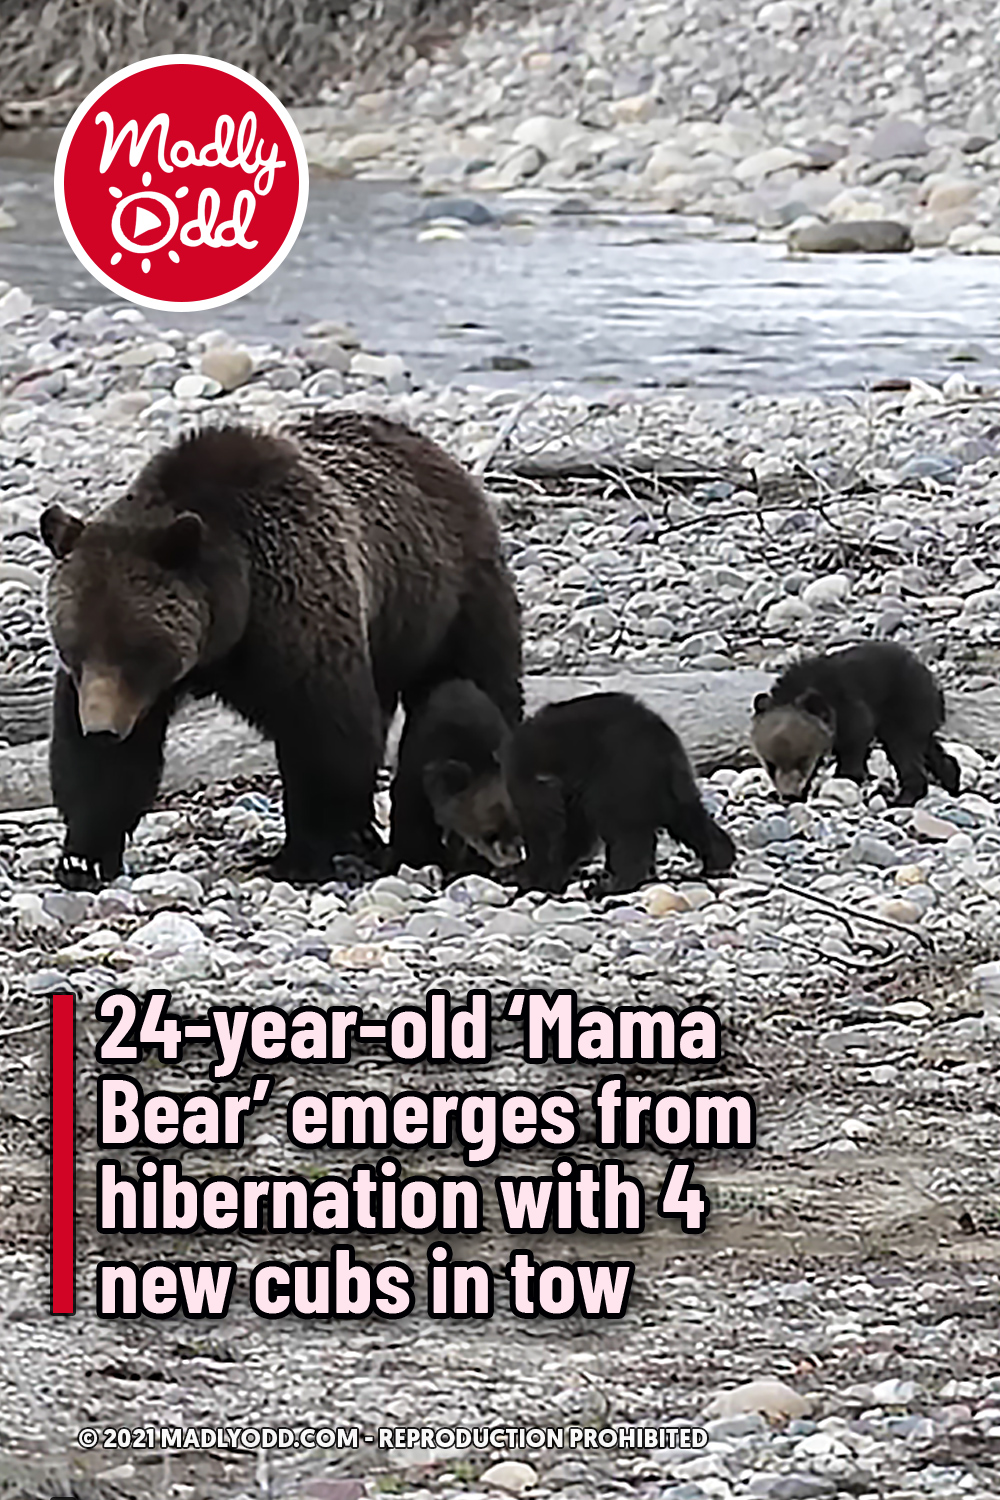 24-year-old ‘Mama Bear’ emerges from hibernation with 4 new cubs in tow